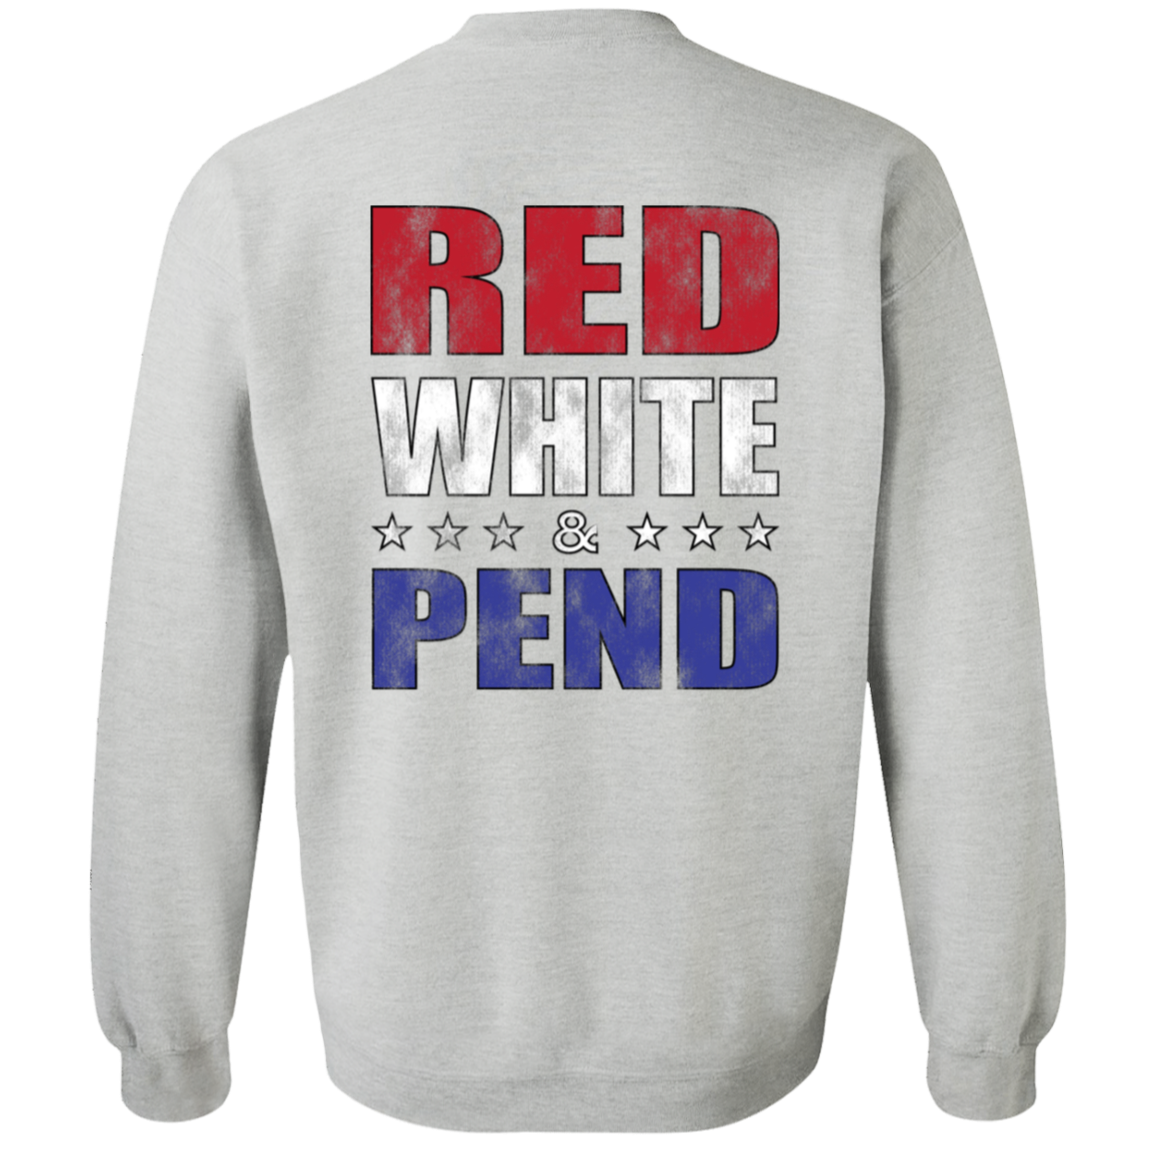 Red White & Pend (on Back) Sweatshirt